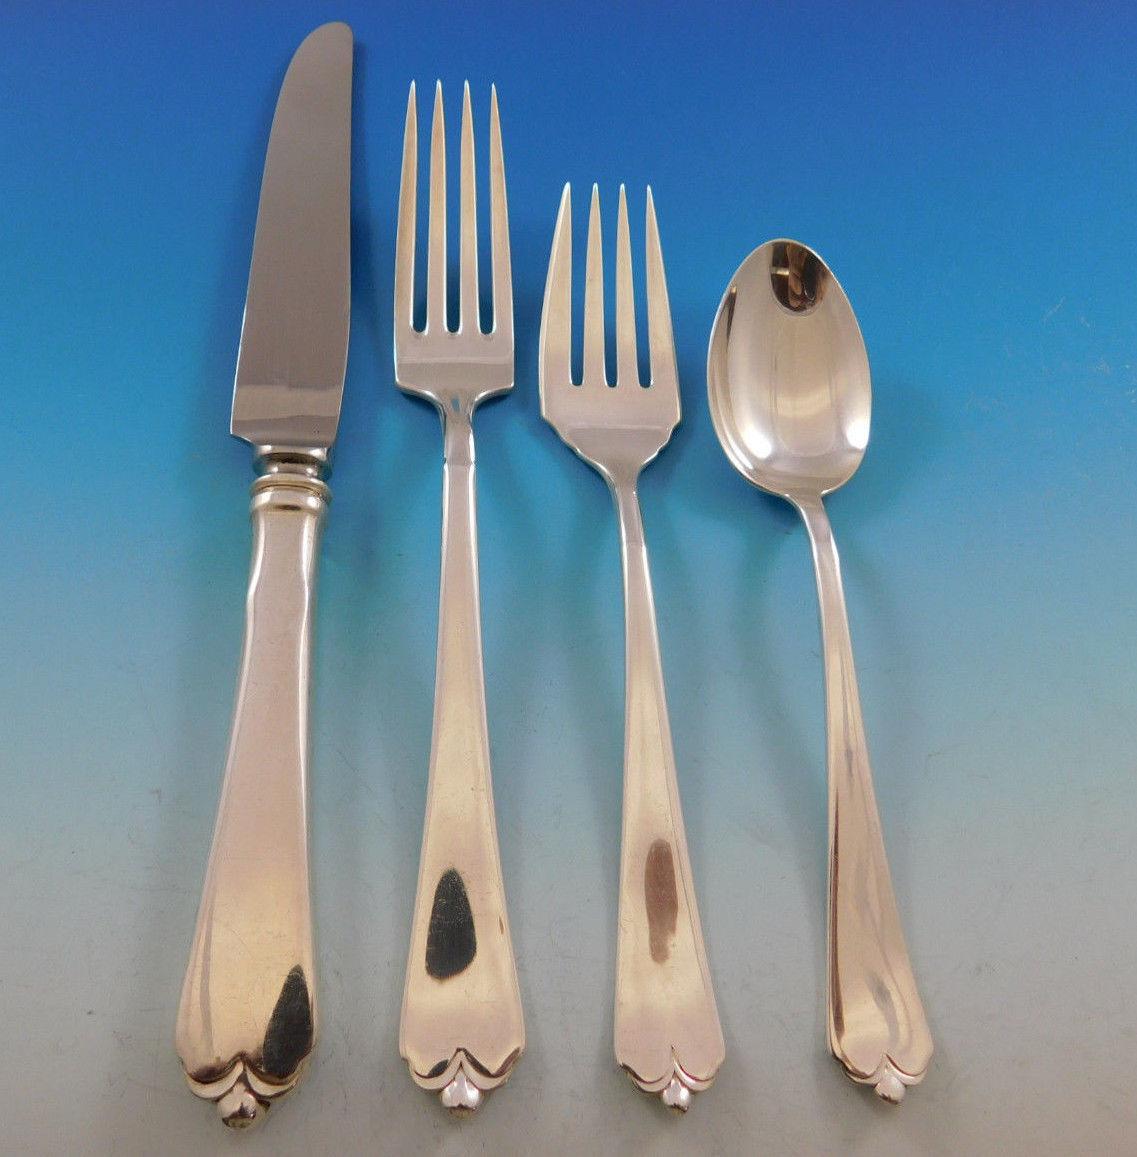 Lotus by Watson-Wallace sterling silver Flatware set, 32 pieces. This set includes:

Eight Knives, 9